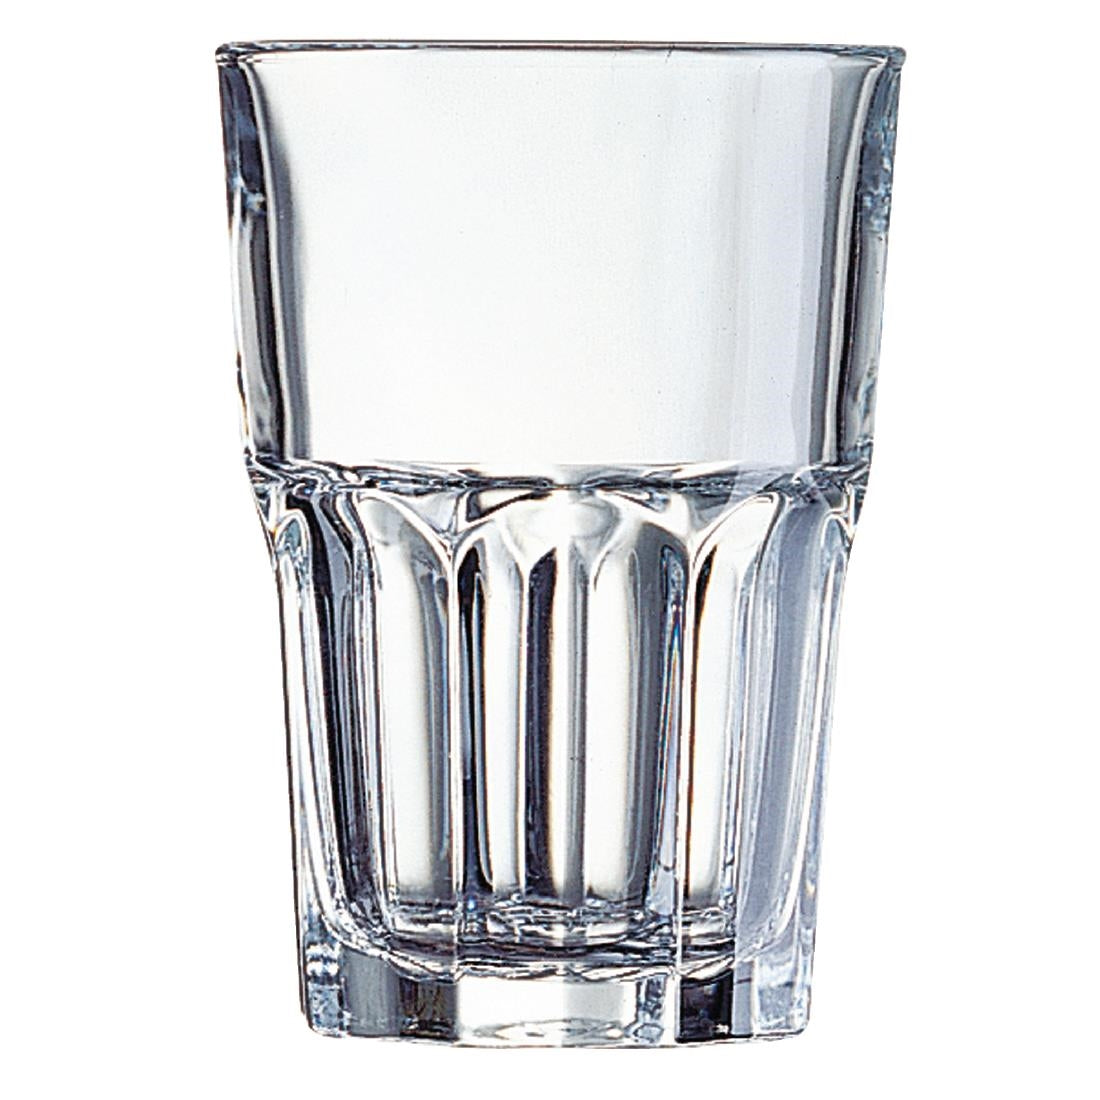 DL220 Arcoroc Granity Hi Ball Glasses 350ml CE Marked at 285ml (Pack of 48) JD Catering Equipment Solutions Ltd